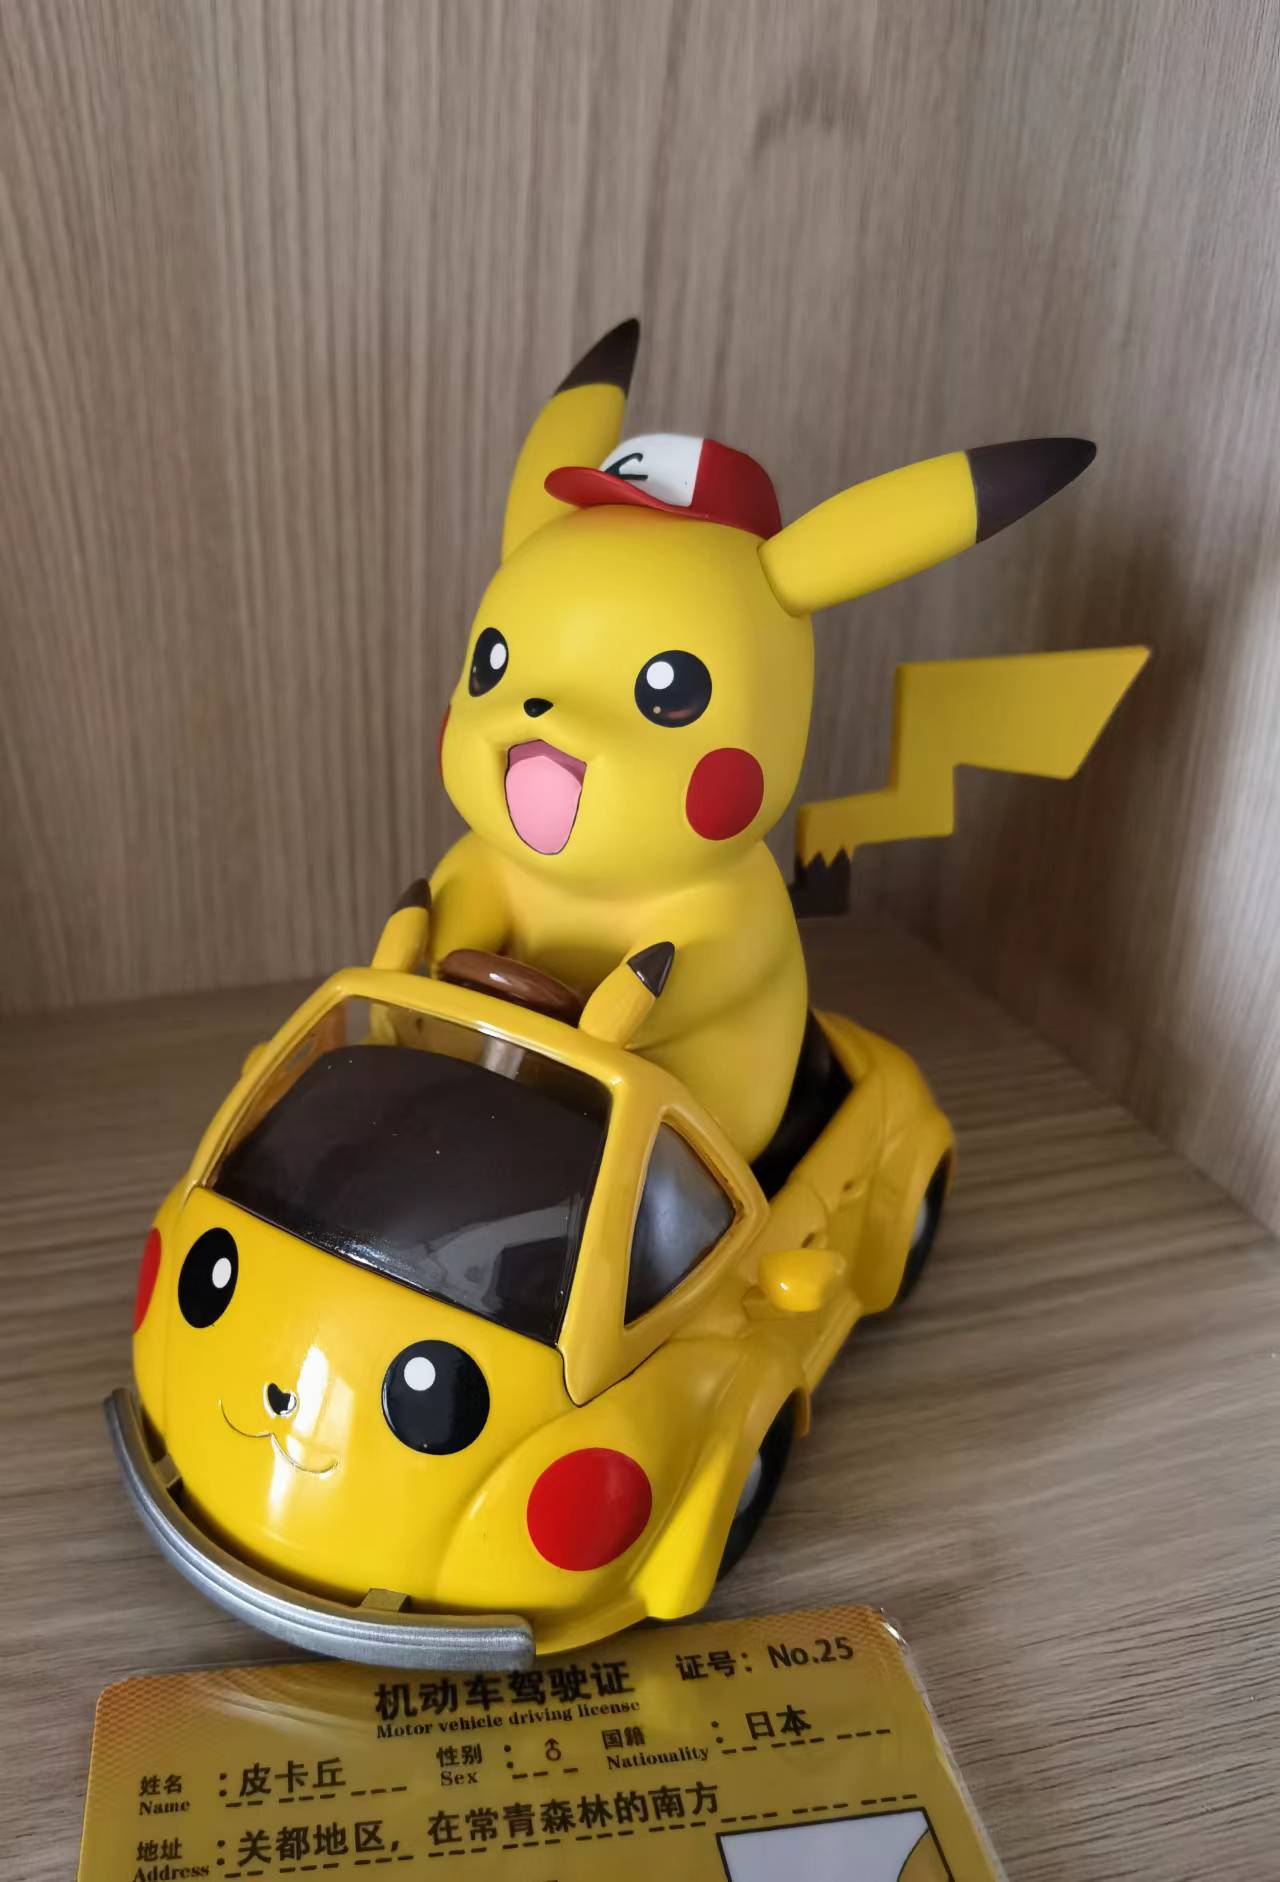 〖Sold Out〗Pokémon Peripheral Products Car Series Pikachu - SUN Studio